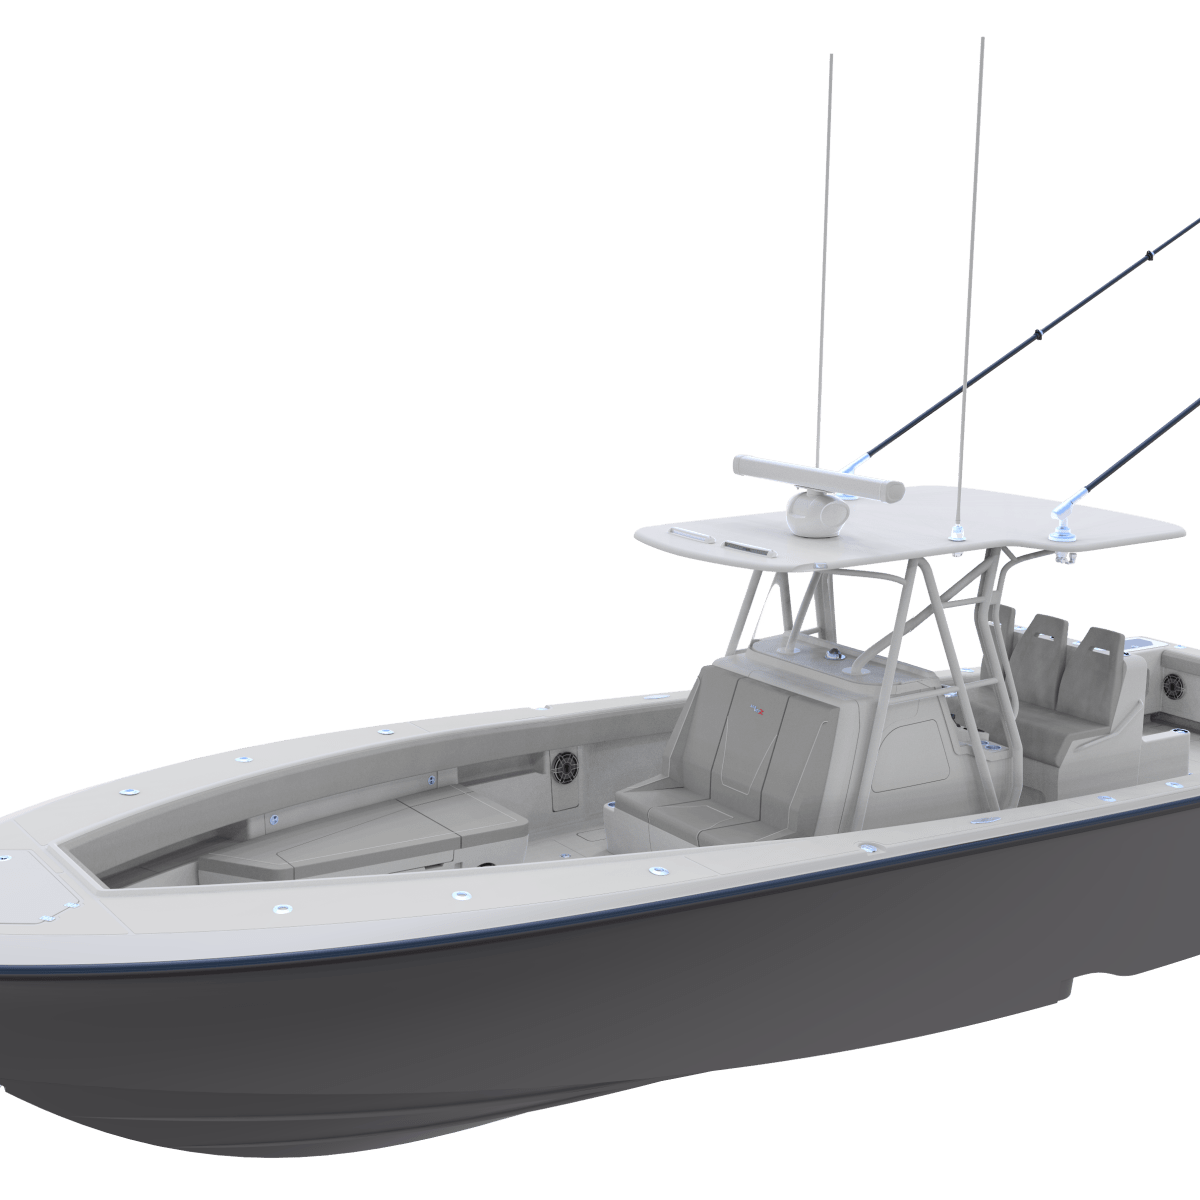 Sea Vee to Launch the 400Z Center Console - Soundings Online